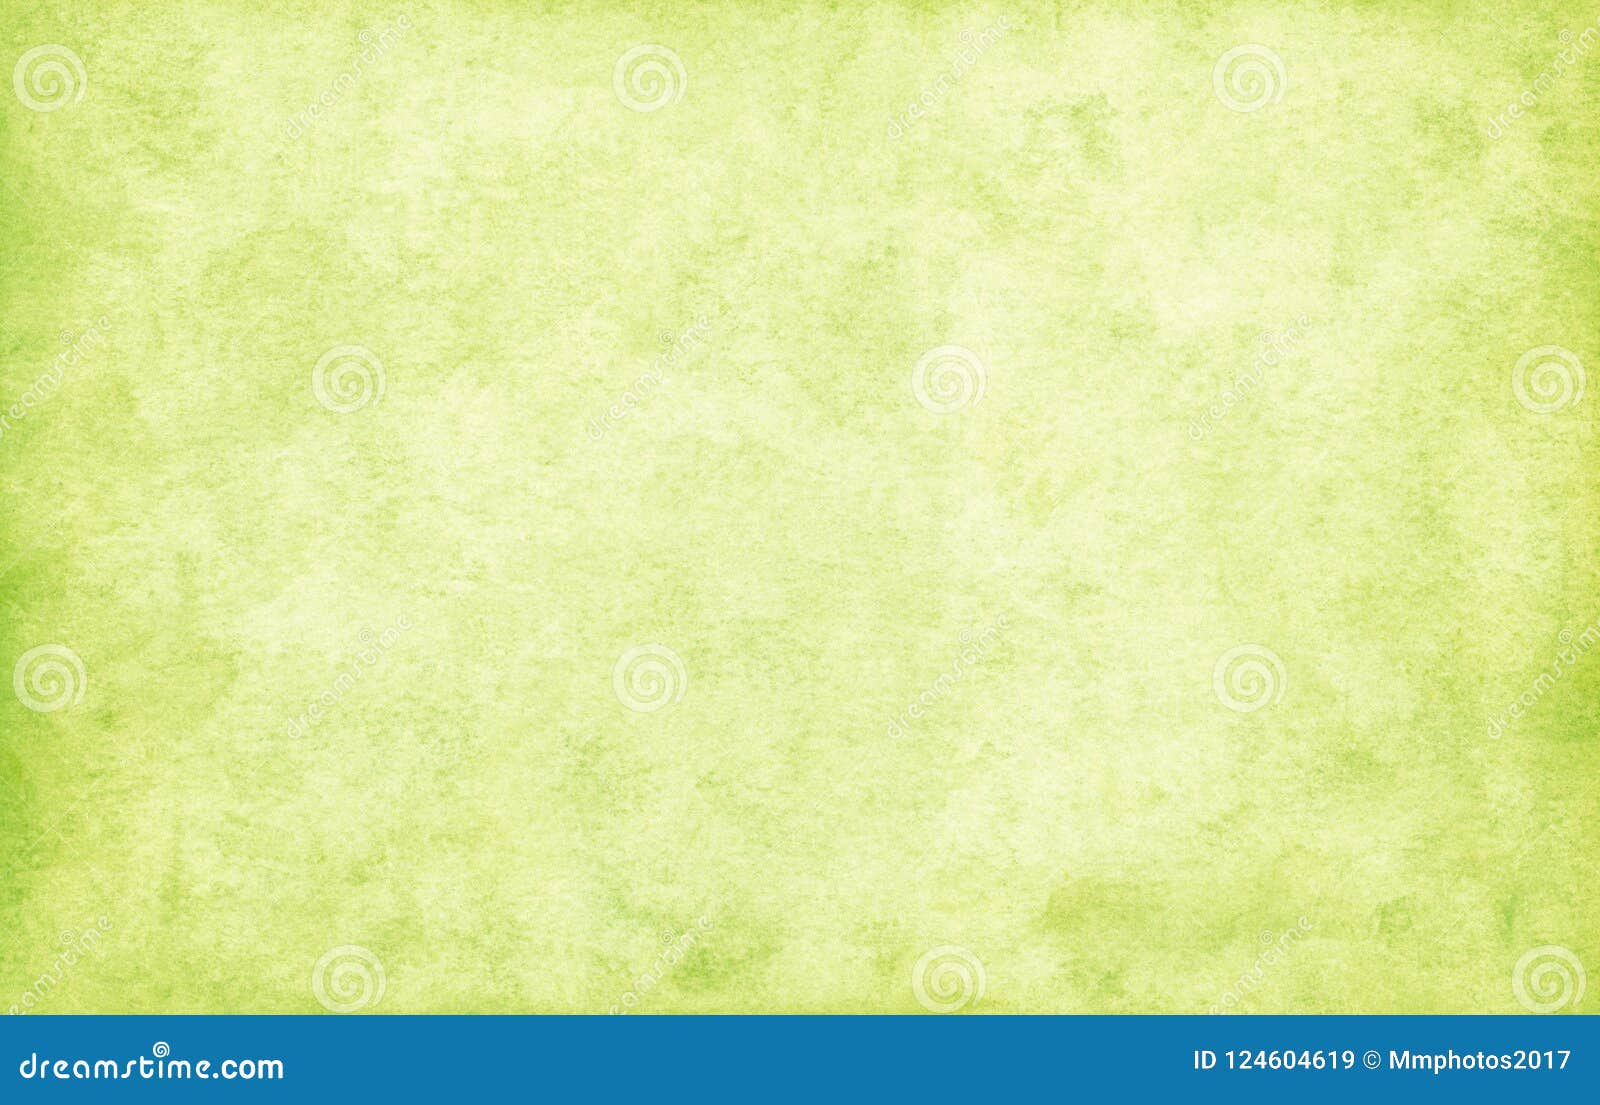 Green Paper Texture Background Stock Image - Image of color, backdrop:  124604619